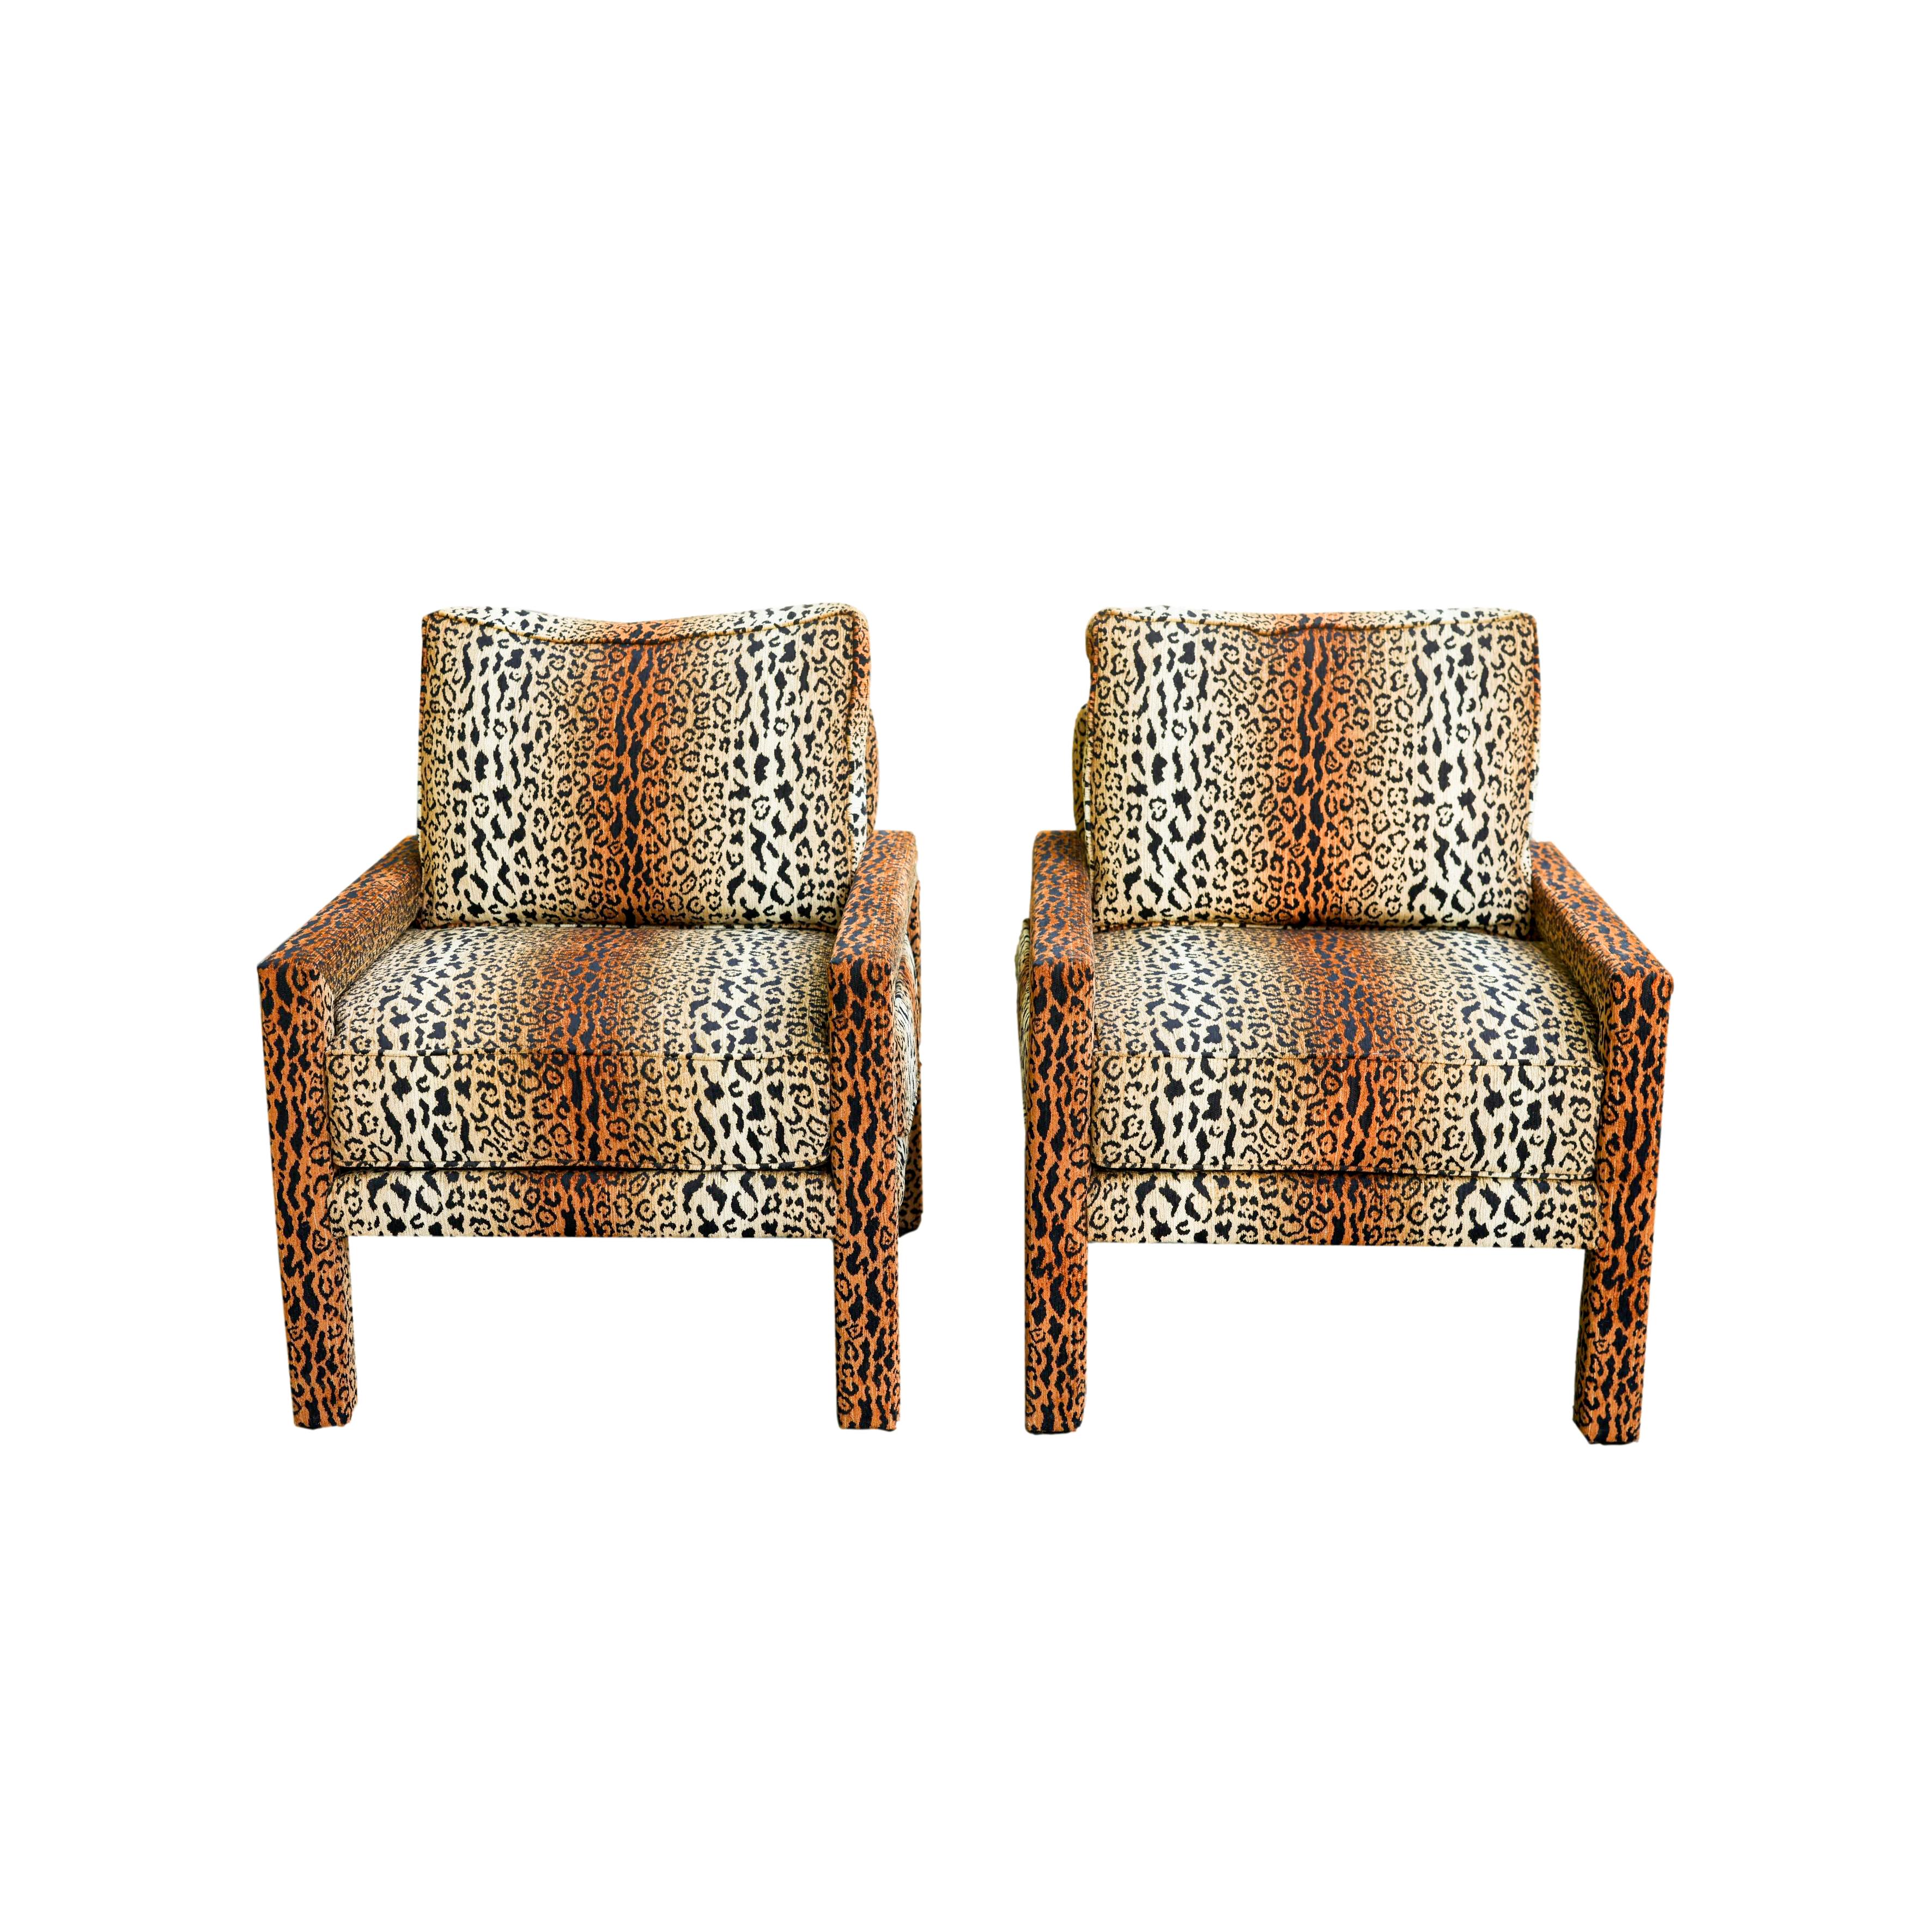 Pair of new Milo Baughman-style Parsons chairs upholstered in high-end designer cheetah velvet.
Our chairs are handcrafted and upholstered from new materials and new fabric by the best craftsmen and artisans in Morganton, North Carolina, the